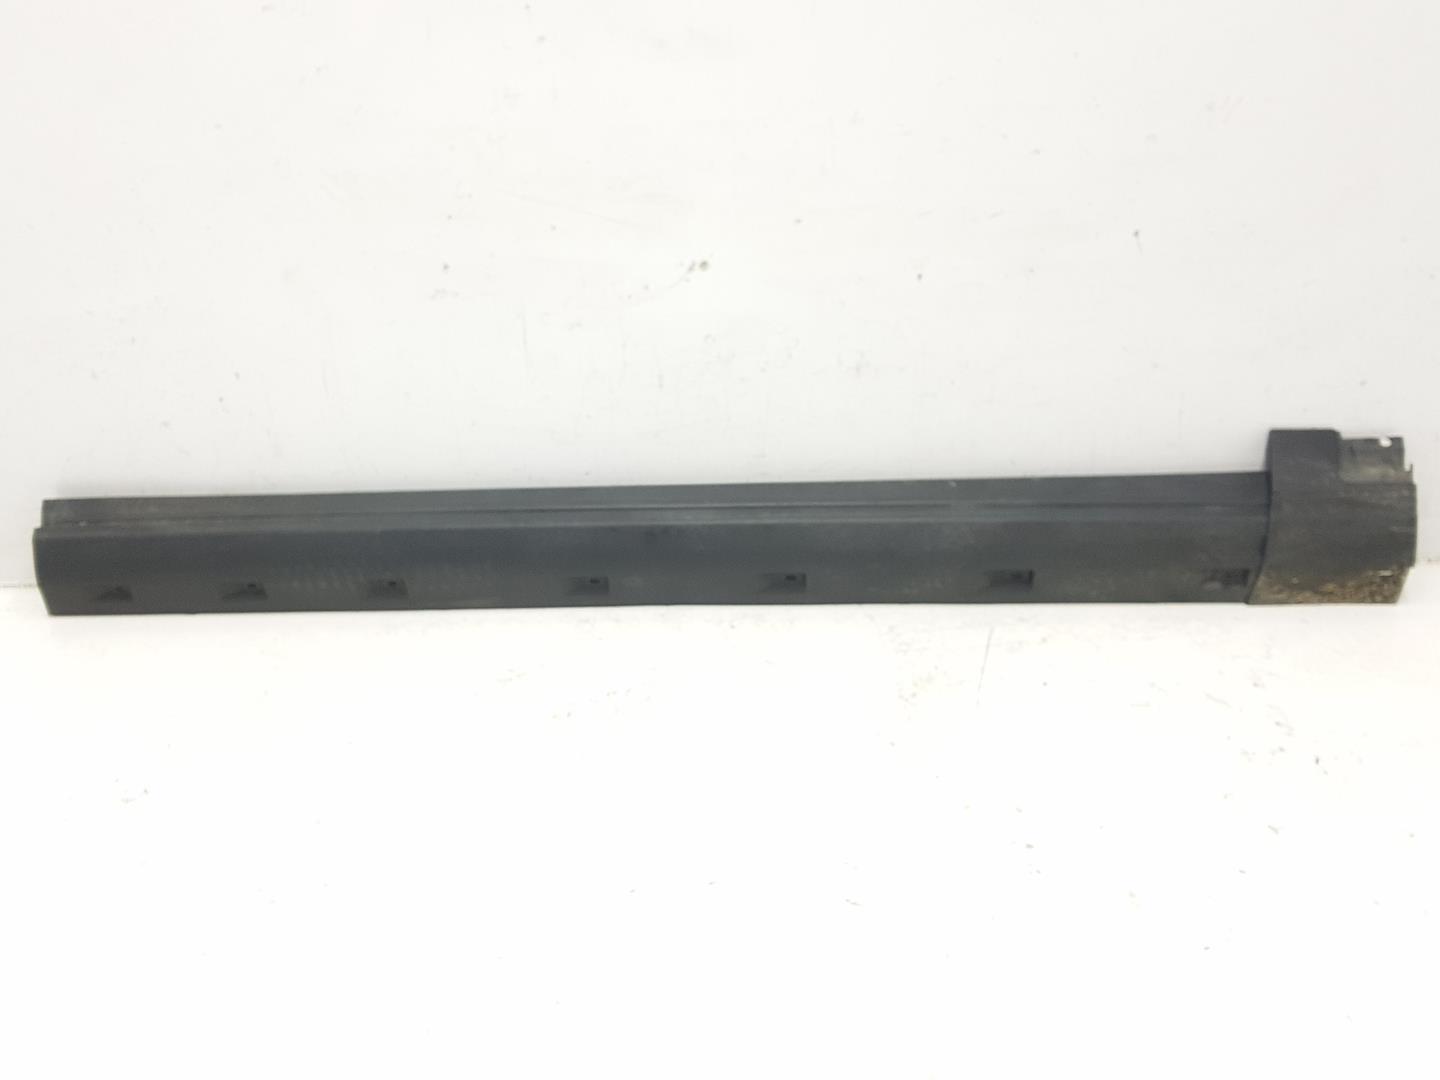 LAND ROVER Discovery 3 generation (2004-2009) Other Body Parts LR063769, FH2210154AC, DERECHA 24214811